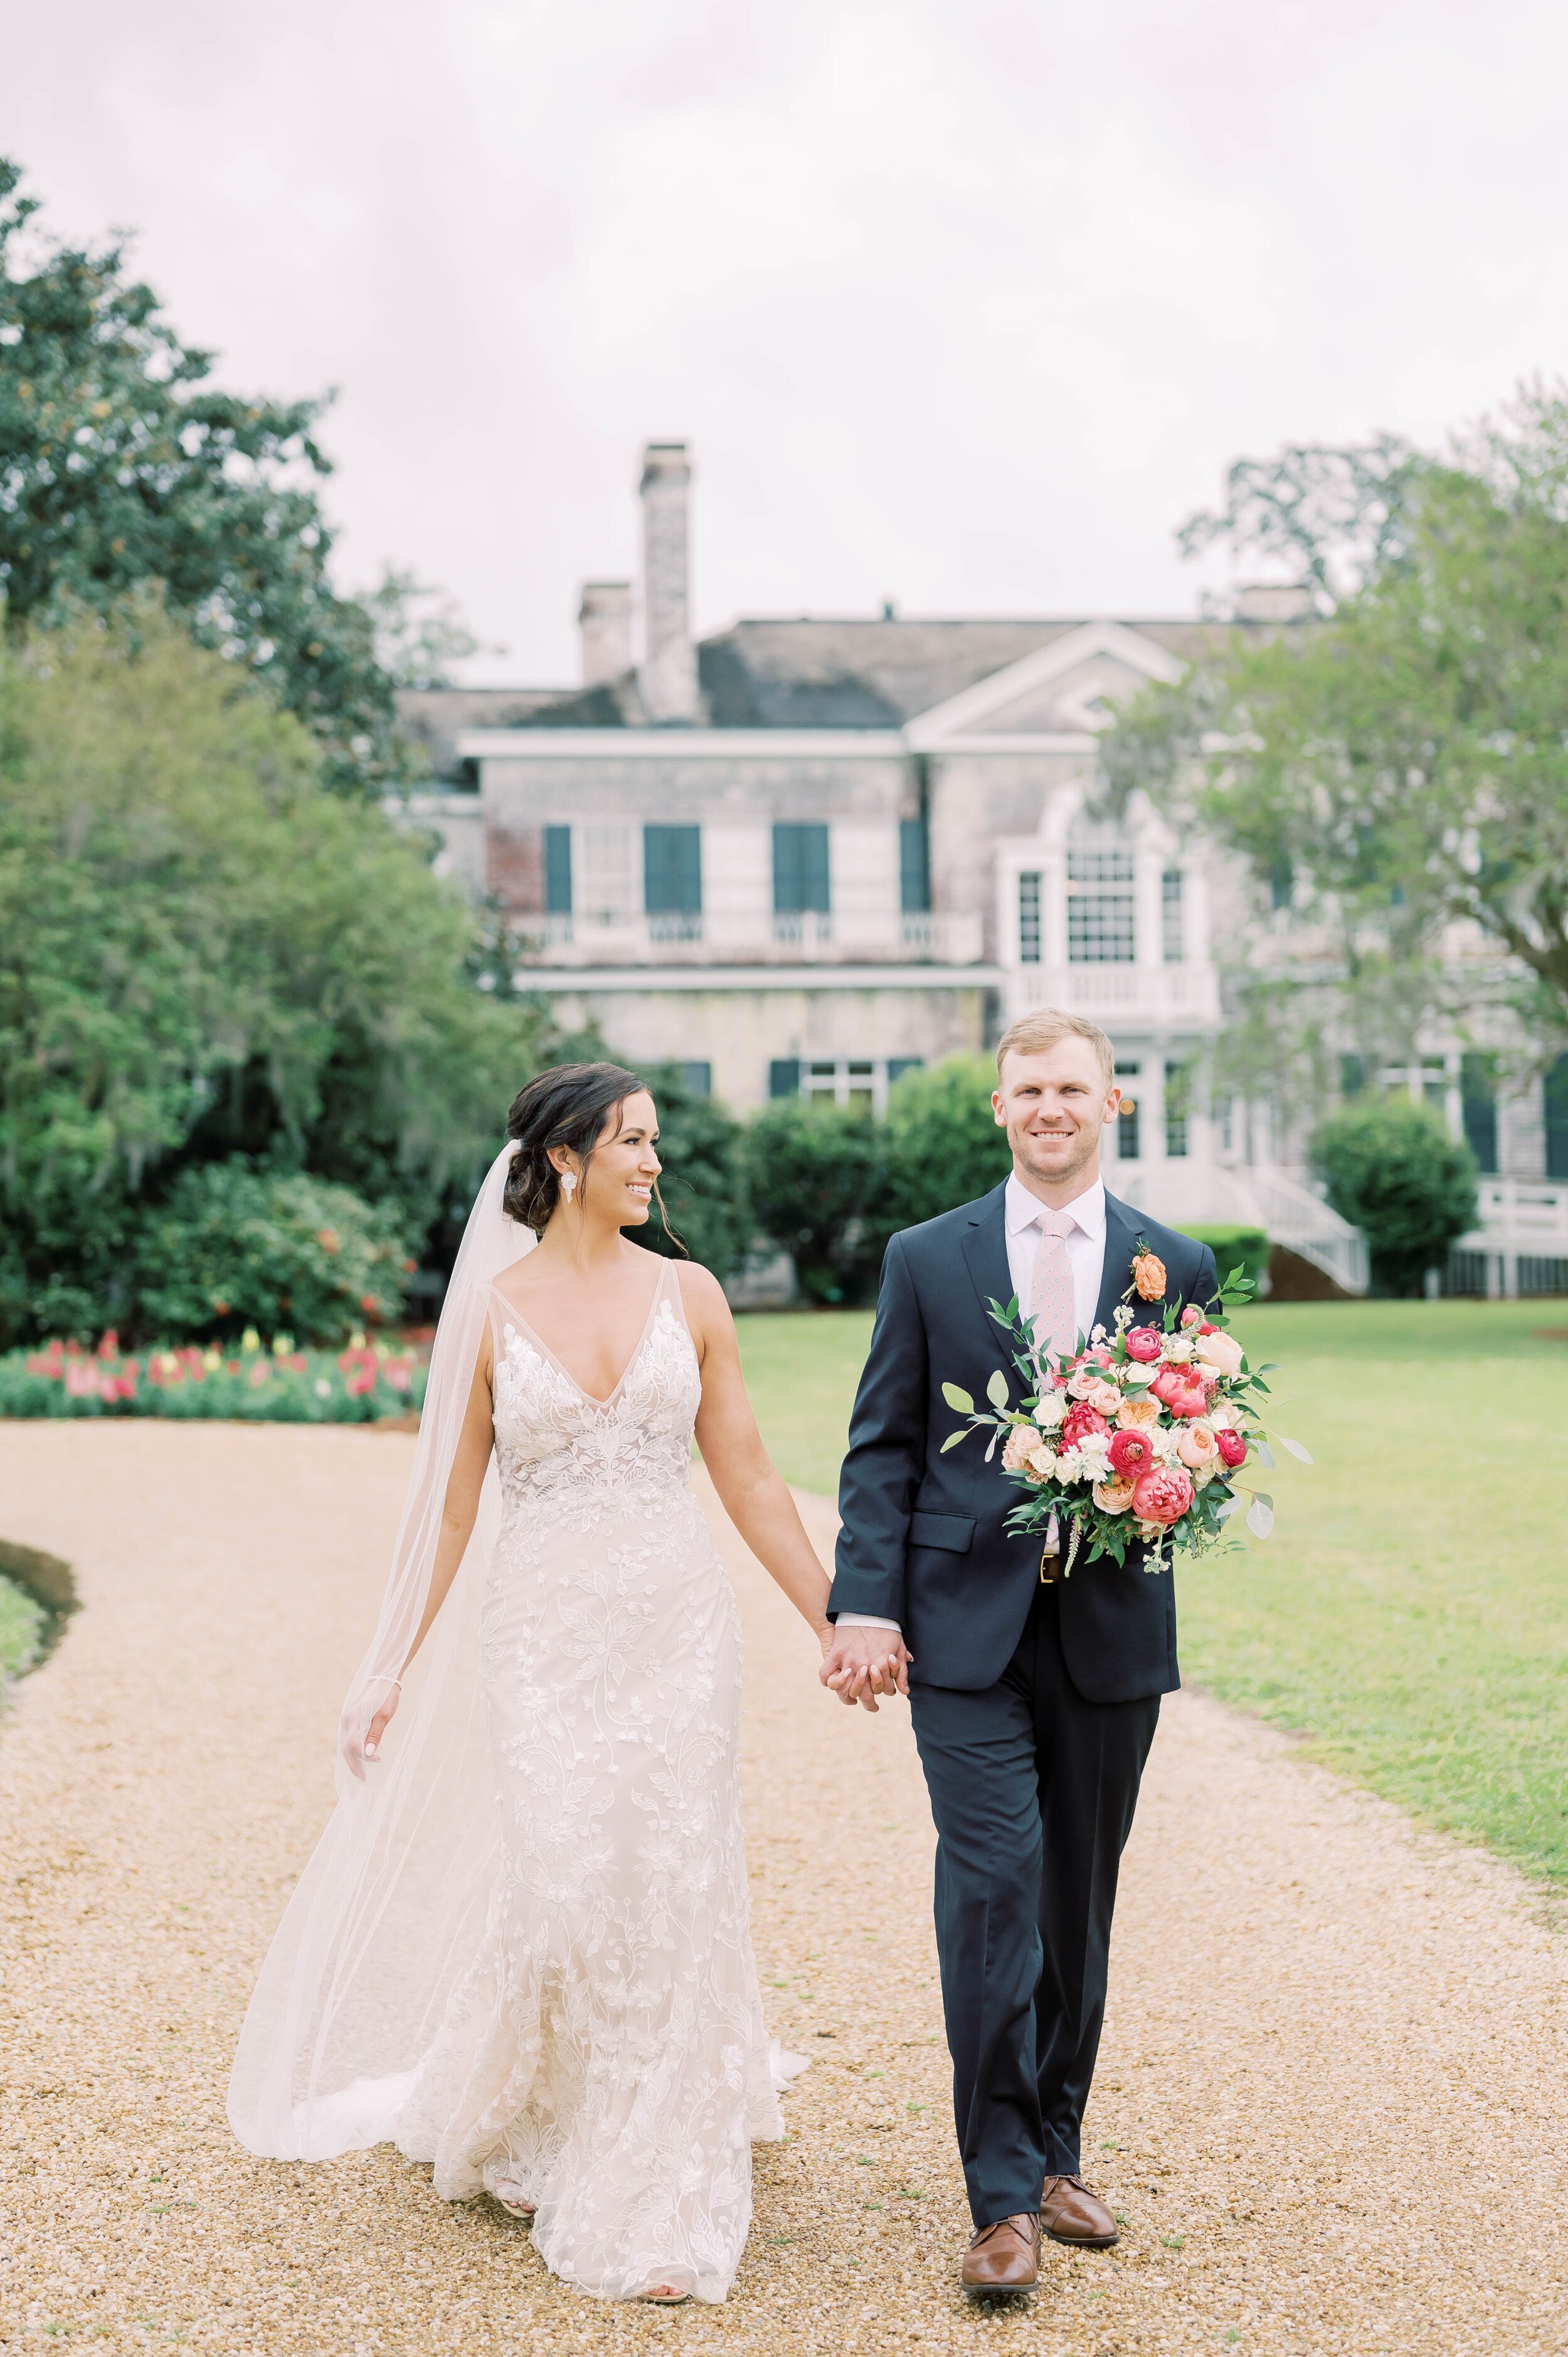 ivory-and-beau-blog-wedding-blog-ivory-and-beau-bride-madison-down-for-the-gown-made-with-love-wedding-dress-bridal-gown-wedding-gown-real-bride-real-wedding-bridal-shop-savannah-georgia-21Madison.Blake-479.jpg